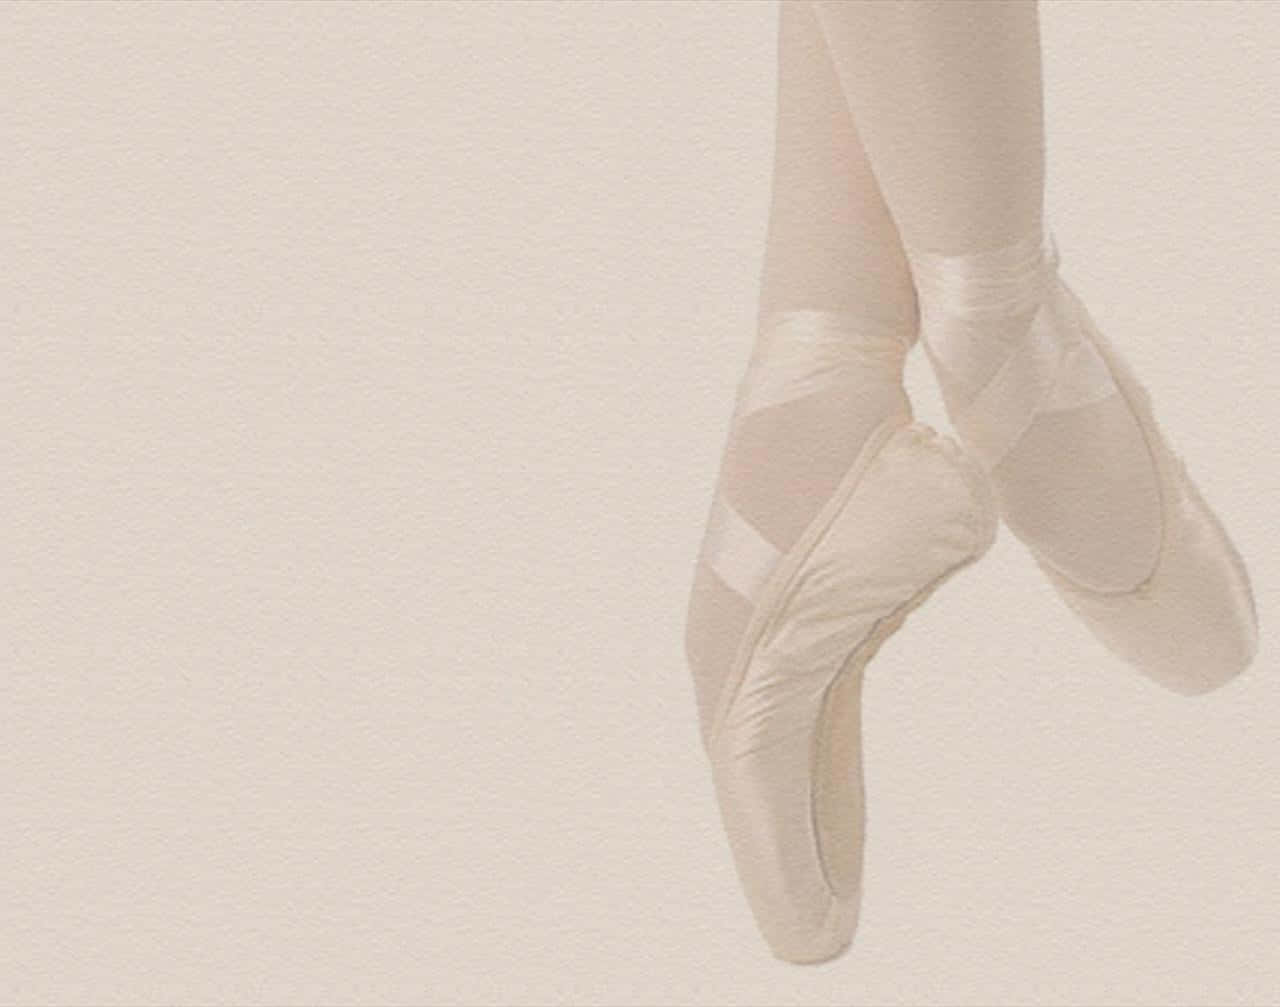 Professional Ballet, Ready For Pointe Shoes Wallpaper